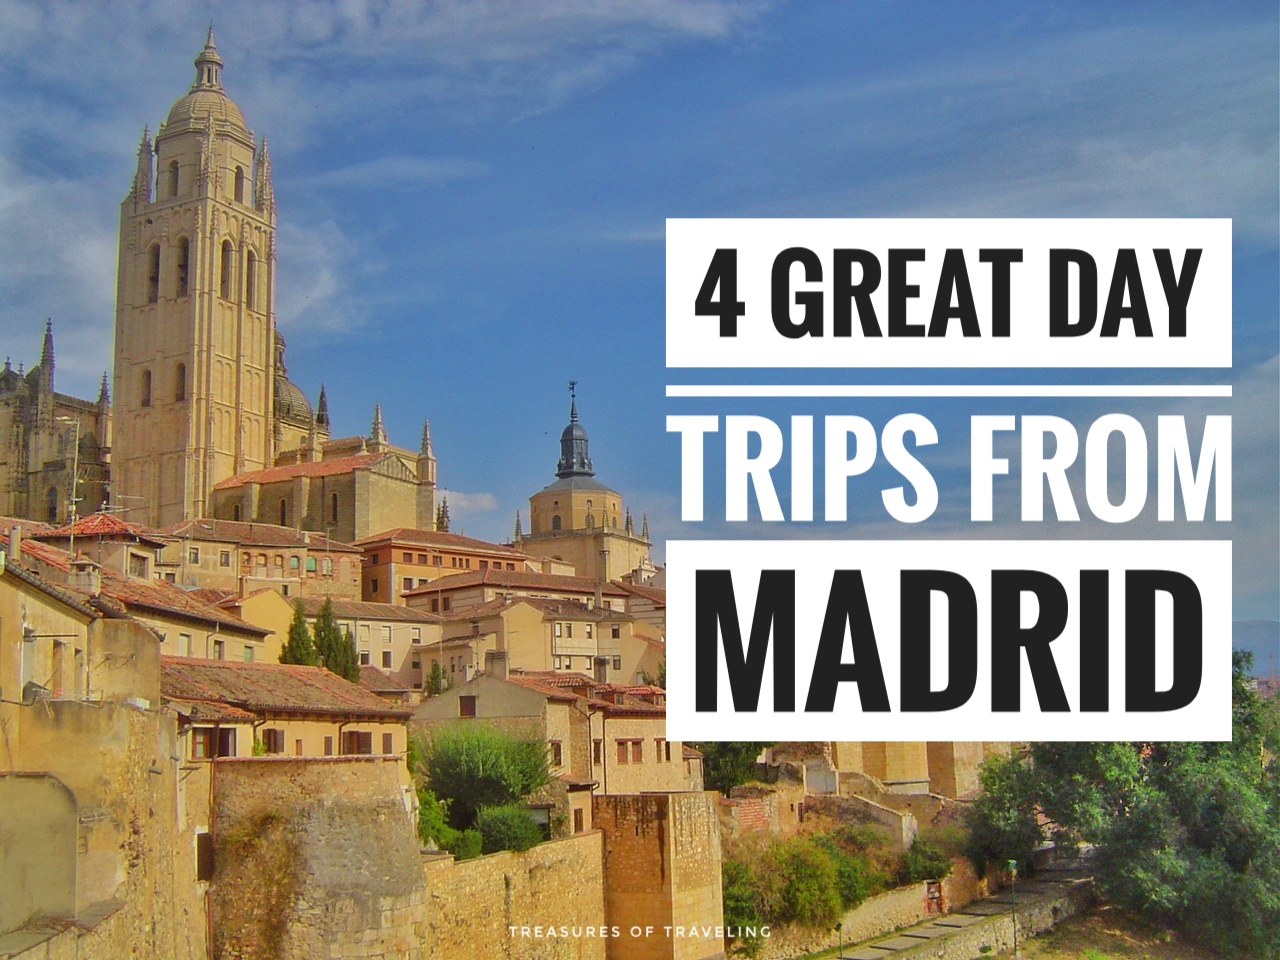 4 Great Day Trips From Madrid!